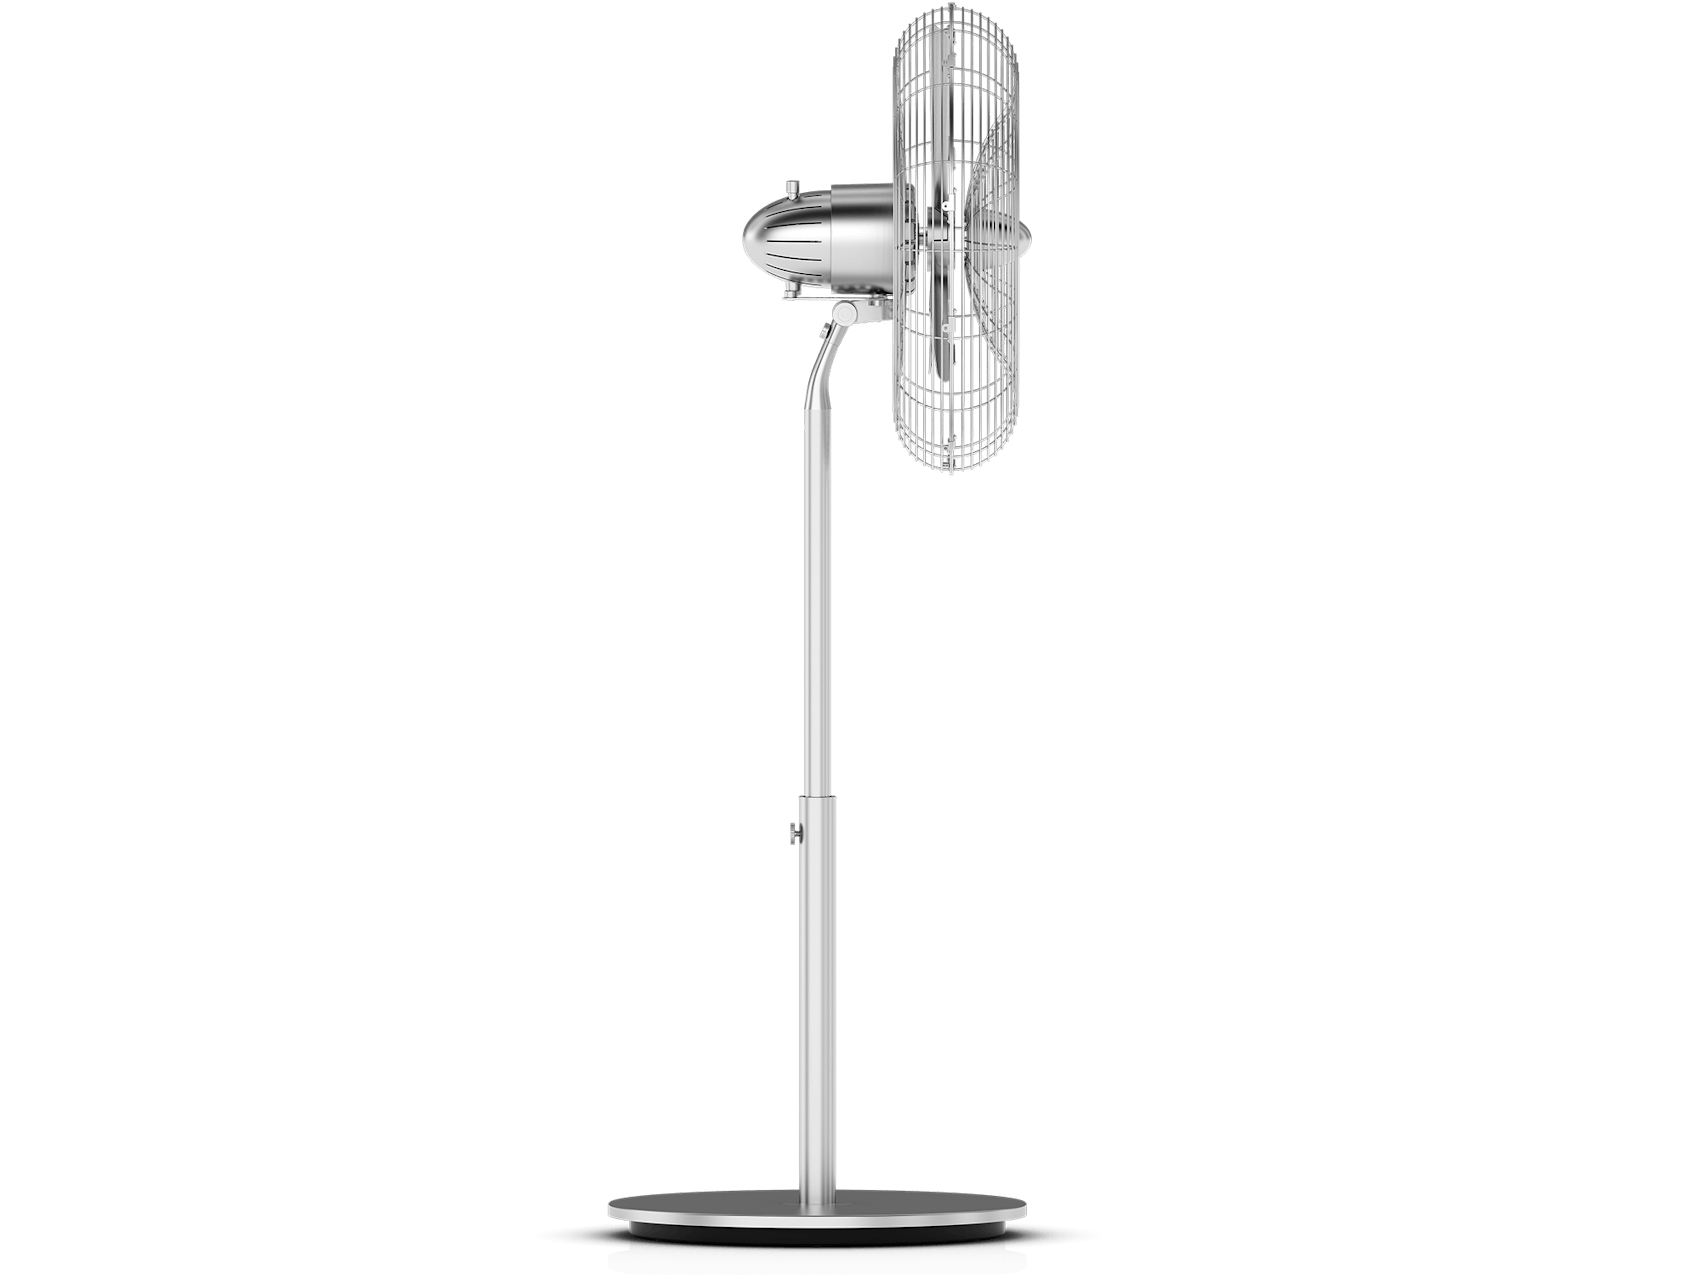 Charly stand Fan | Stadler Form